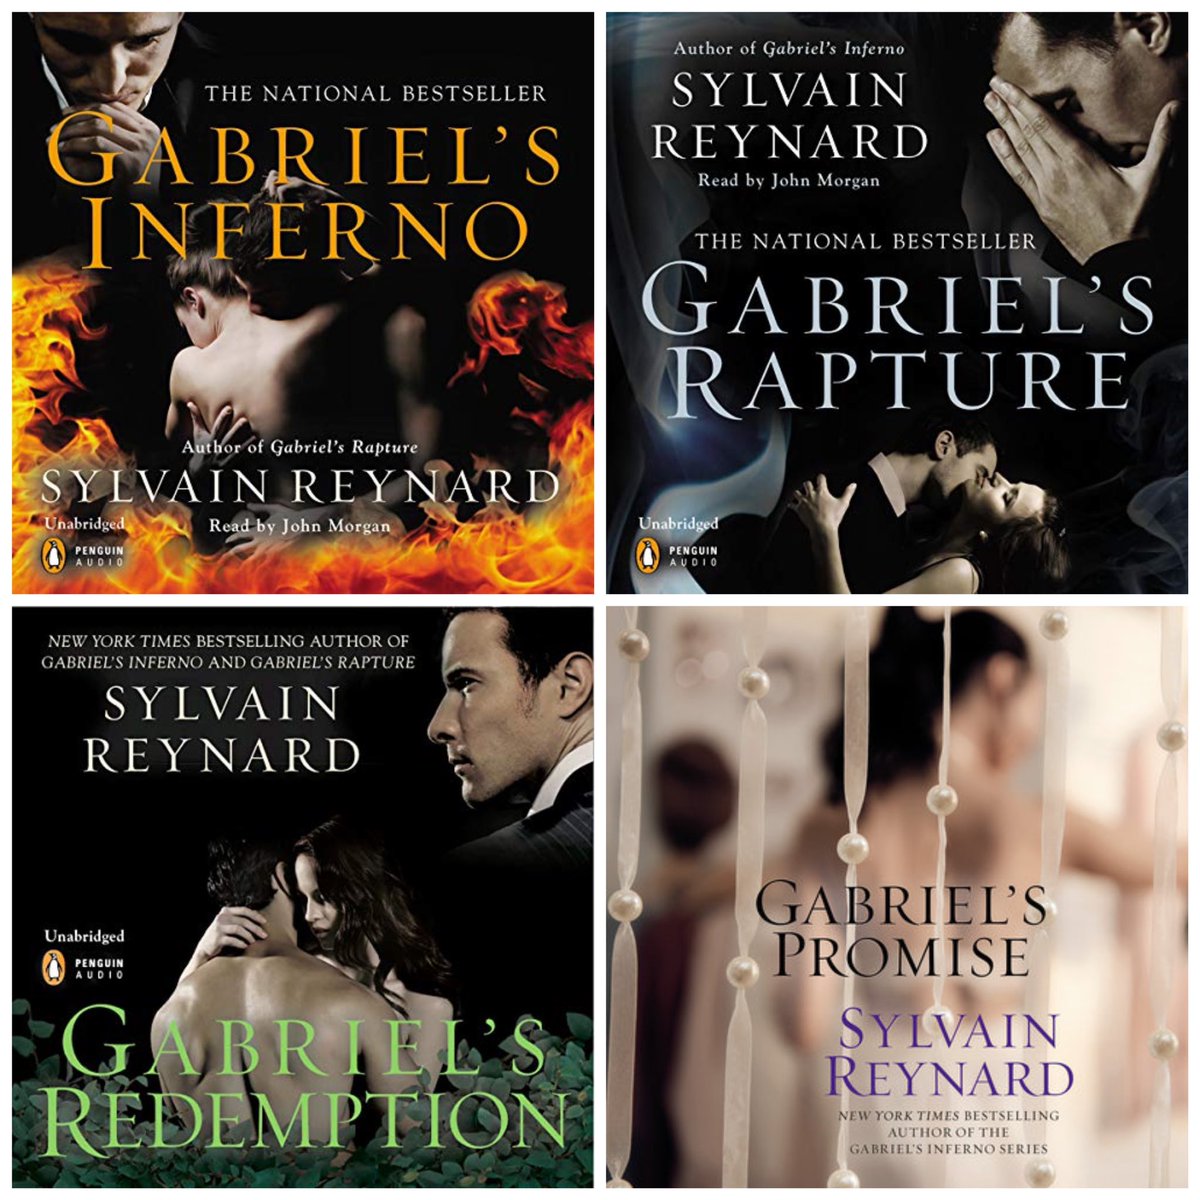 #Paul is in love with #Julia. Will he win her heart? Find out in the #GabrielSeries by @sylvainreynard. 
#GabrielsInferno:
books.apple.com/us/book/gabrie…
#GabrielsRapture:
books.apple.com/us/audiobook/g…
#GabrielsRedemption:
books.apple.com/us/book/gabrie…
#GabrielsPromise:
books.apple.com/us/book/gabrie…